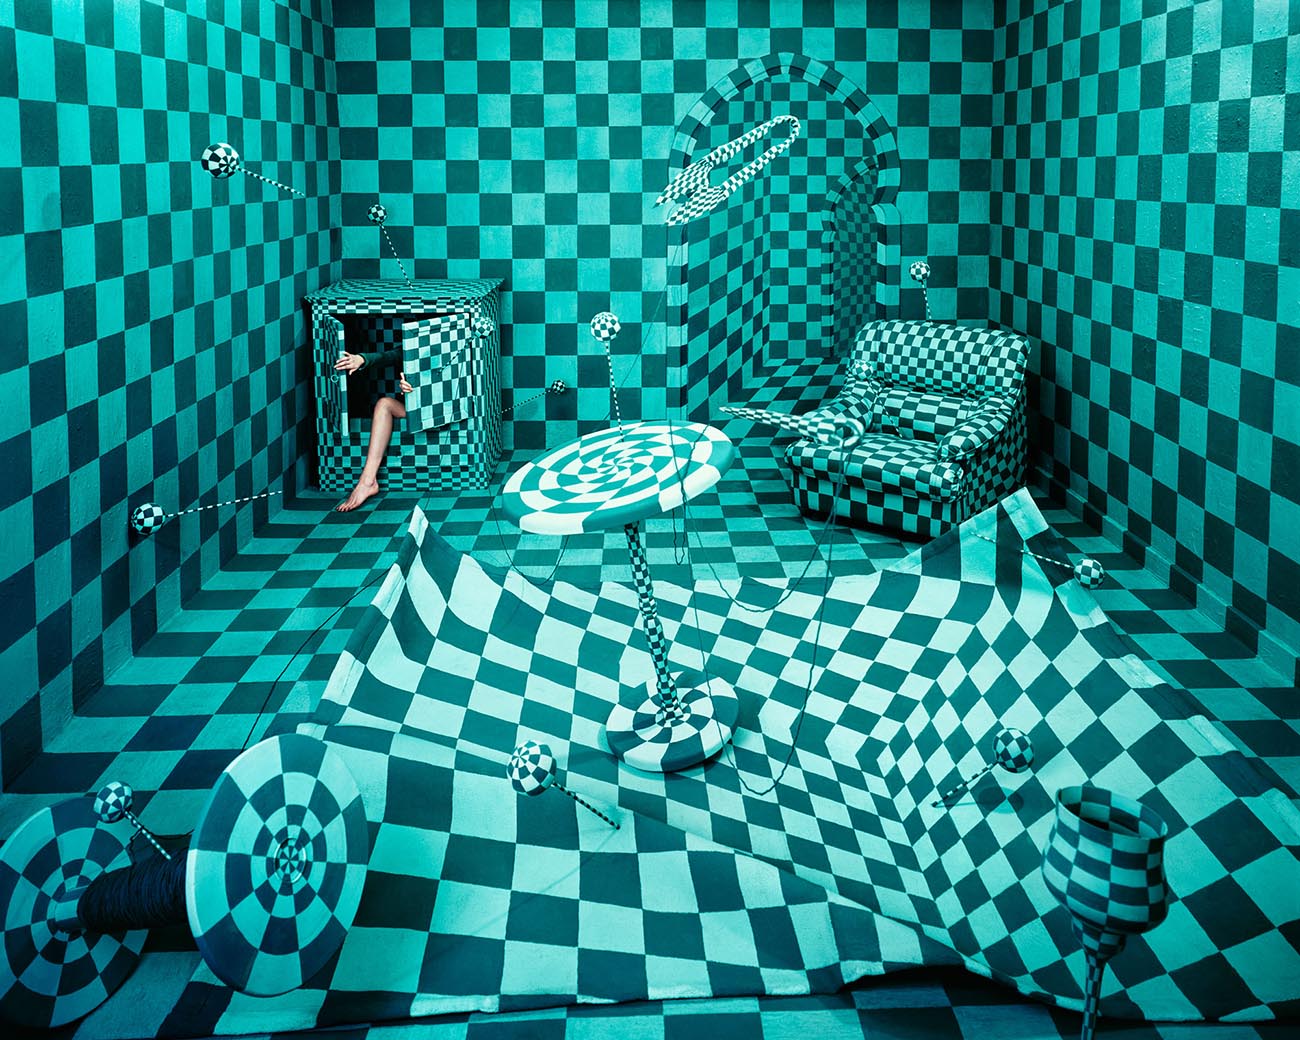 jee young lee korea dreamscapes photography